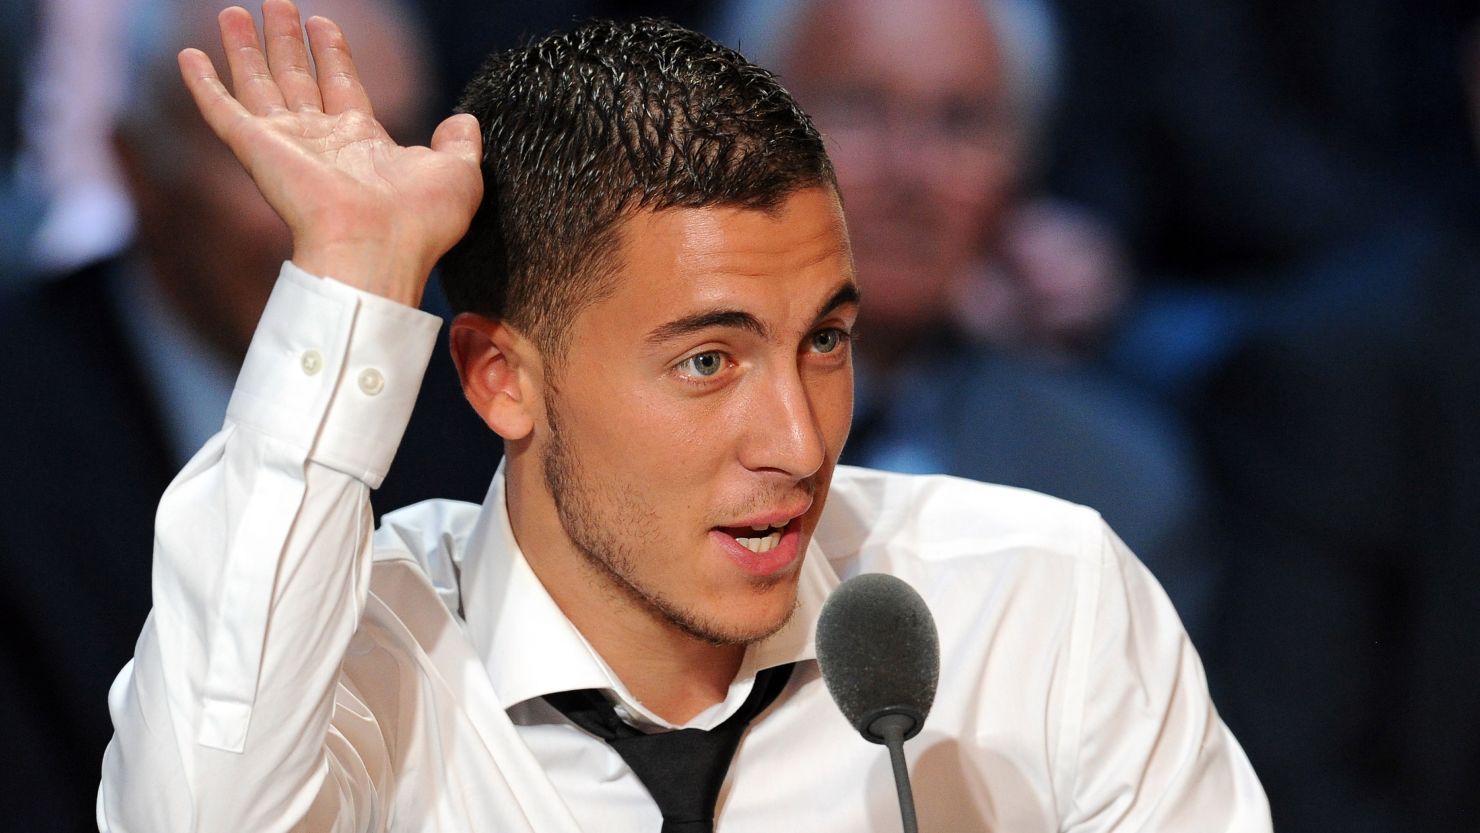 Eden Hazard has revealed on Twitter that he will be joining Champions League winners Chelsea next season